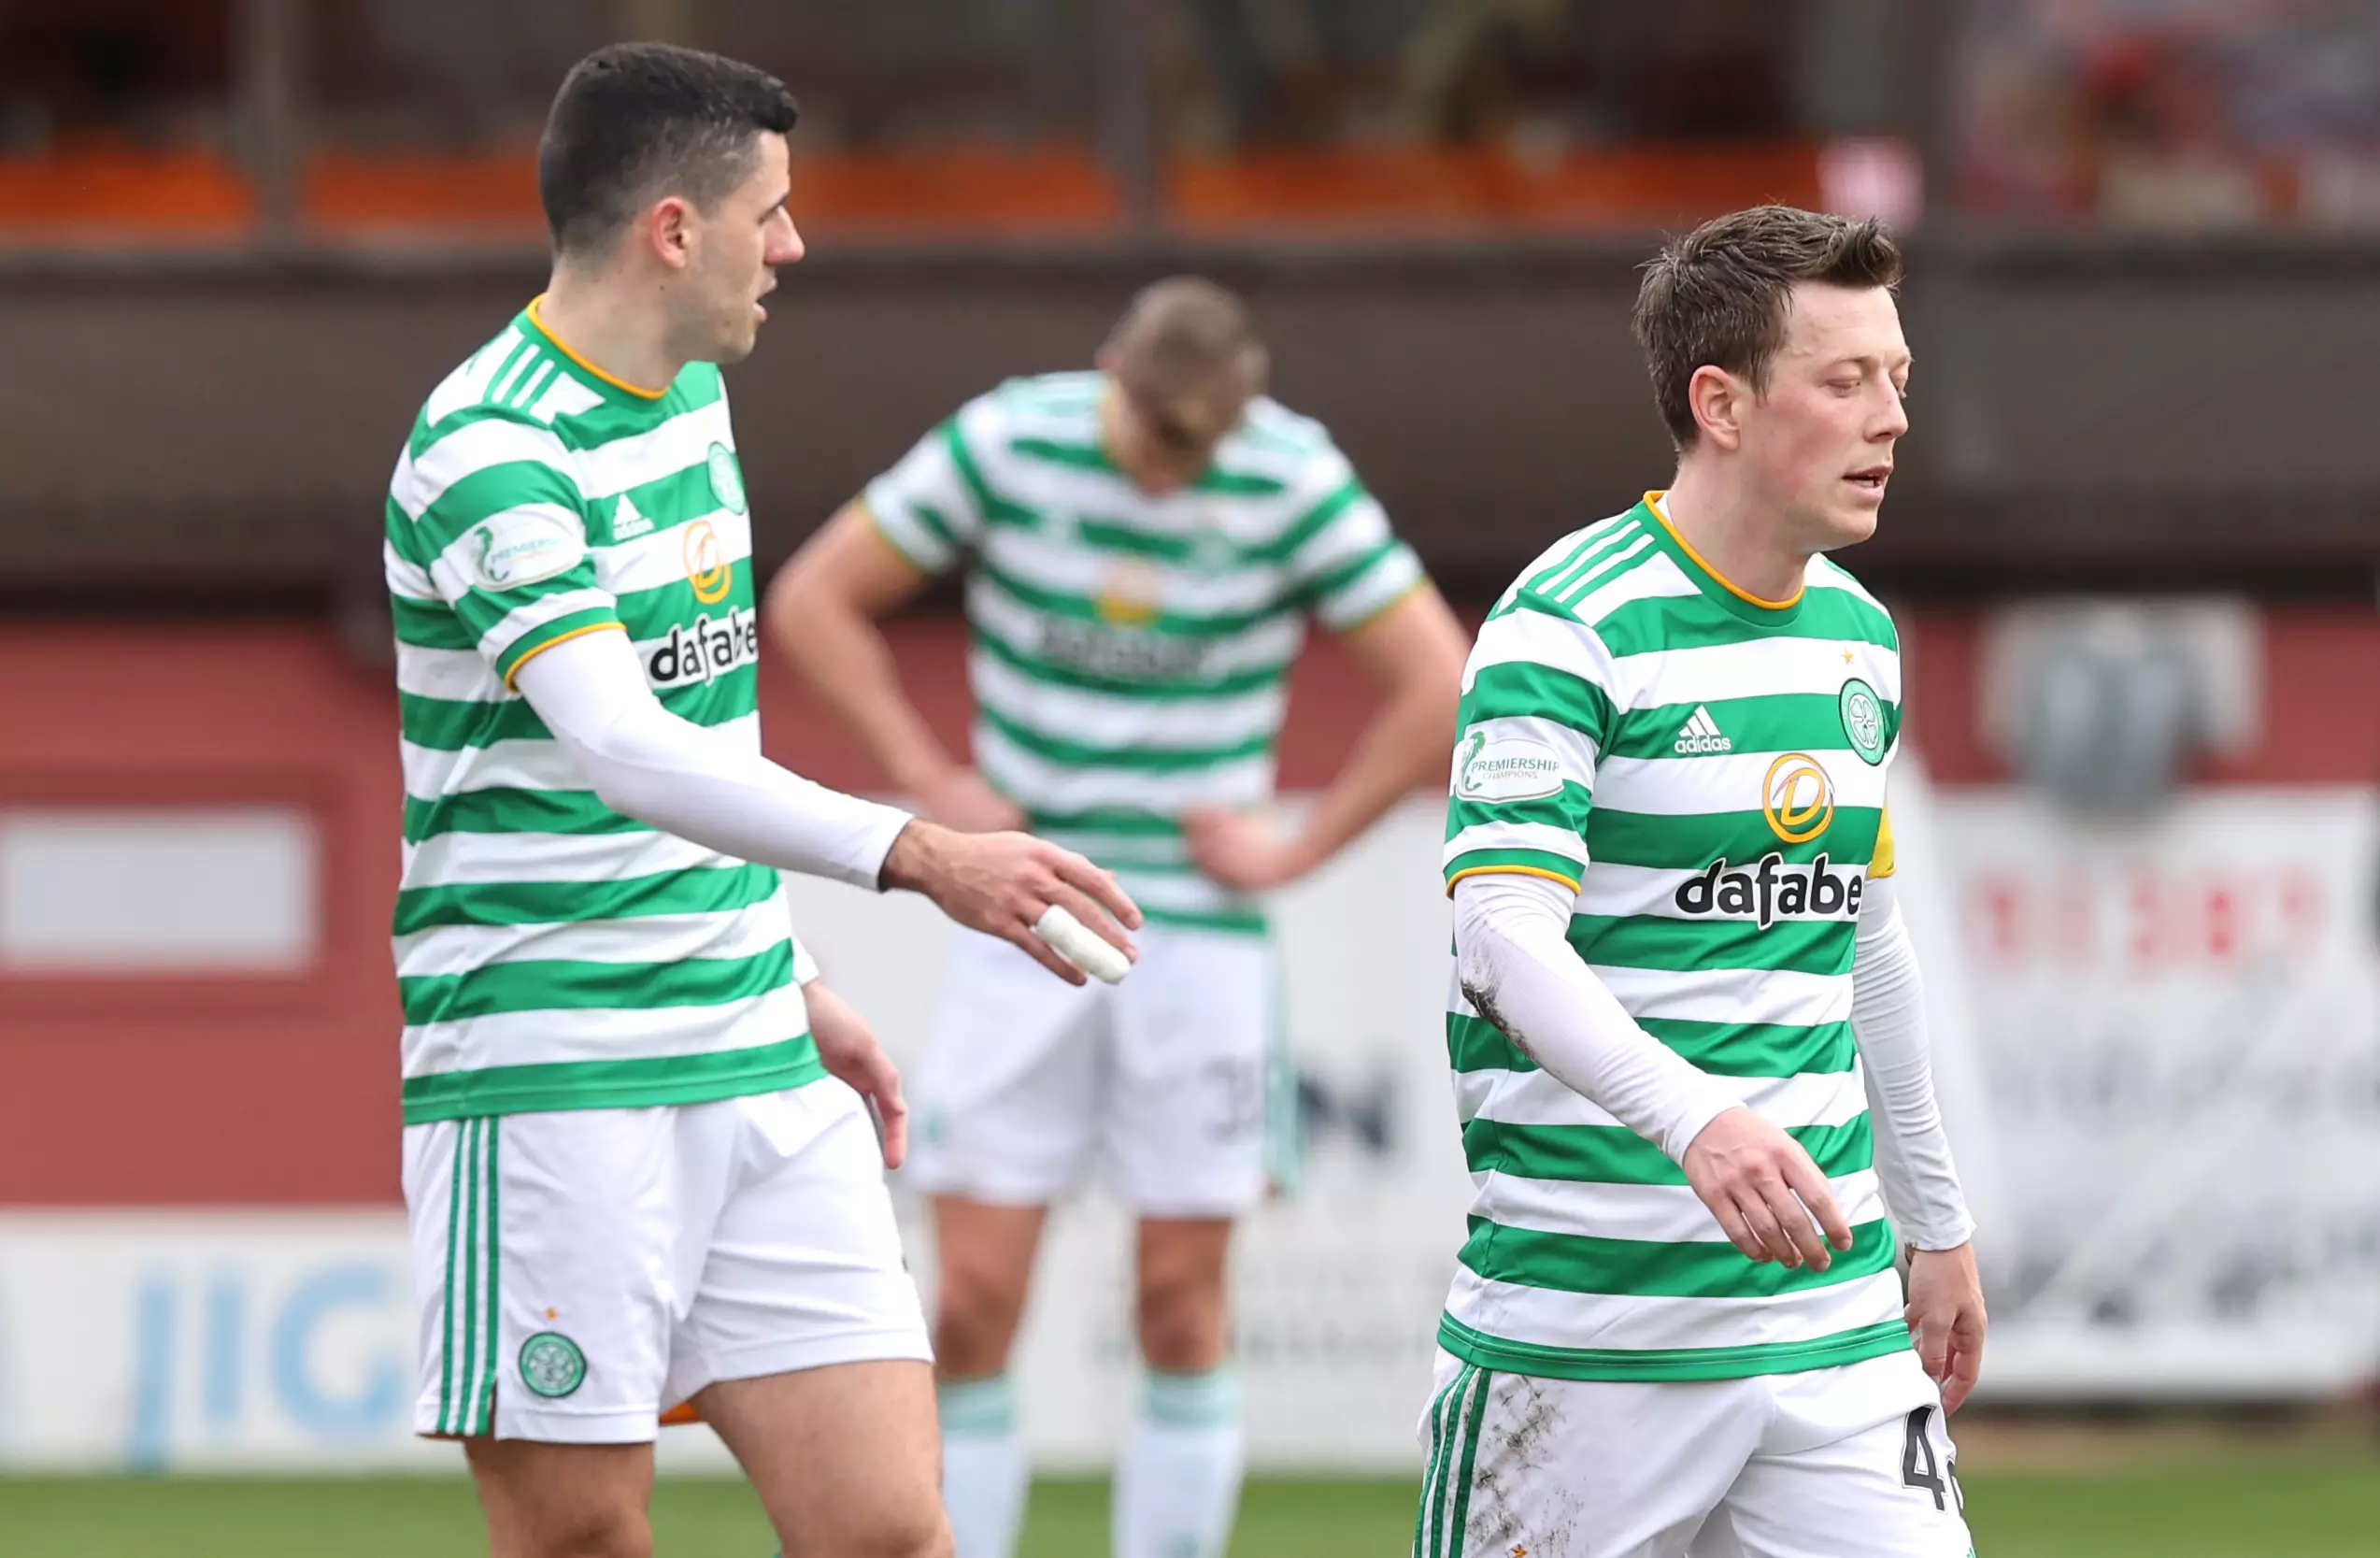 Celtic players dejected at full time. Image: PA Images